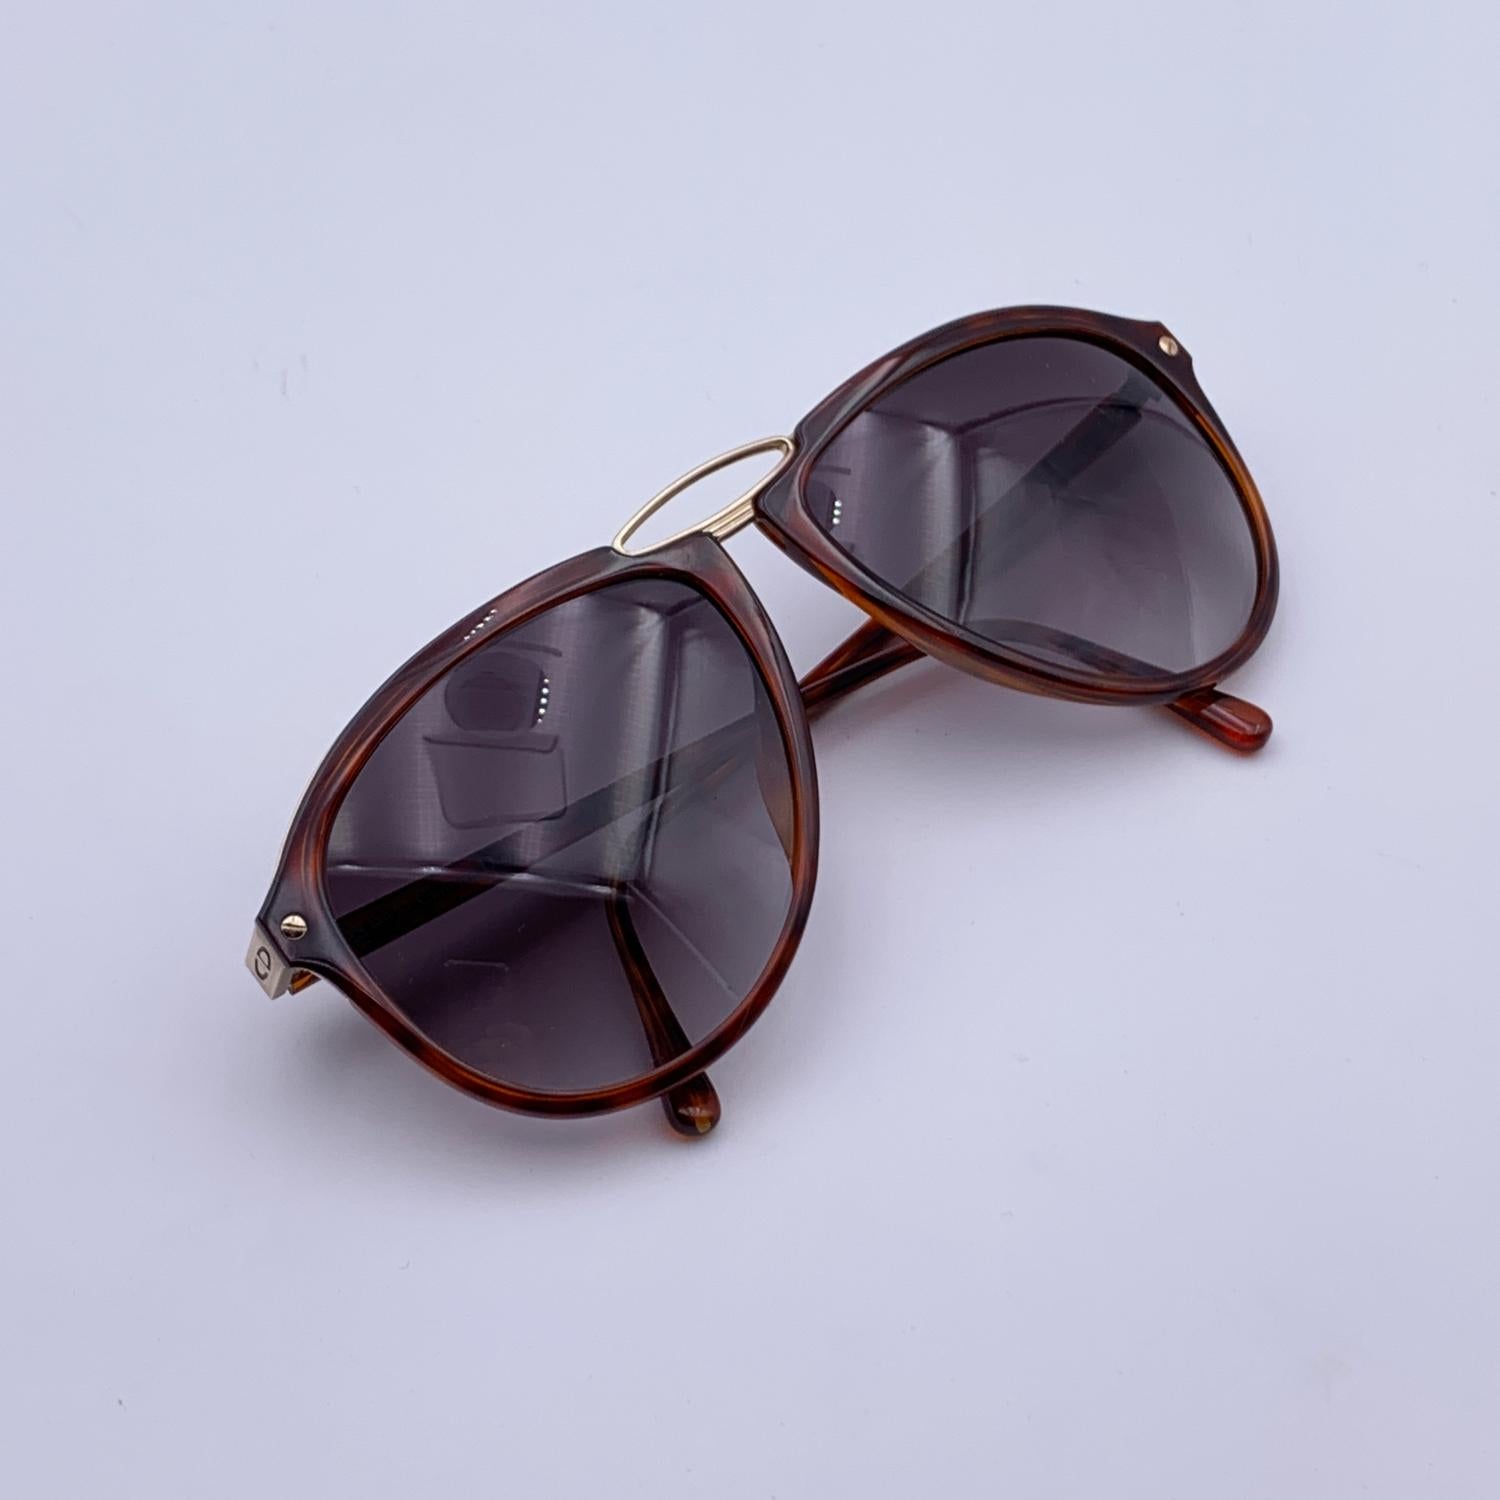 Vintage Christian Dior sunglasses, Mod. 2523 - Col 10. Brown Optylframe with gold metaldetails. Aviator design. Original 100% Total UVA/UVB protection in gradient grey color. CD logo on temples. Made in Austria

Details

MATERIAL: Acetate

COLOR: